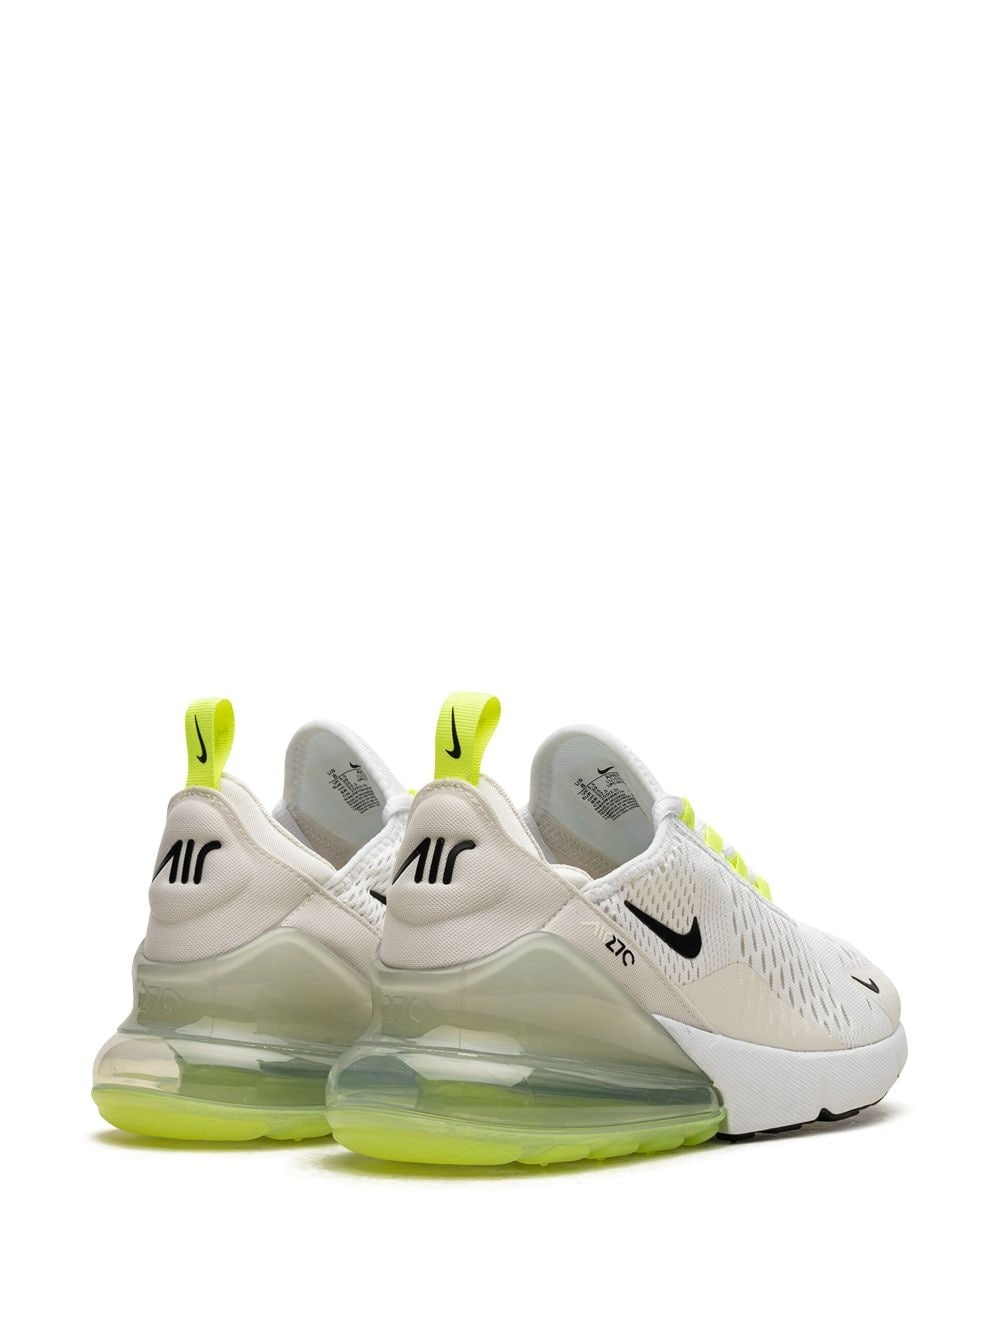 Air Max 270 "White/Ghost Green" sneakers - 3